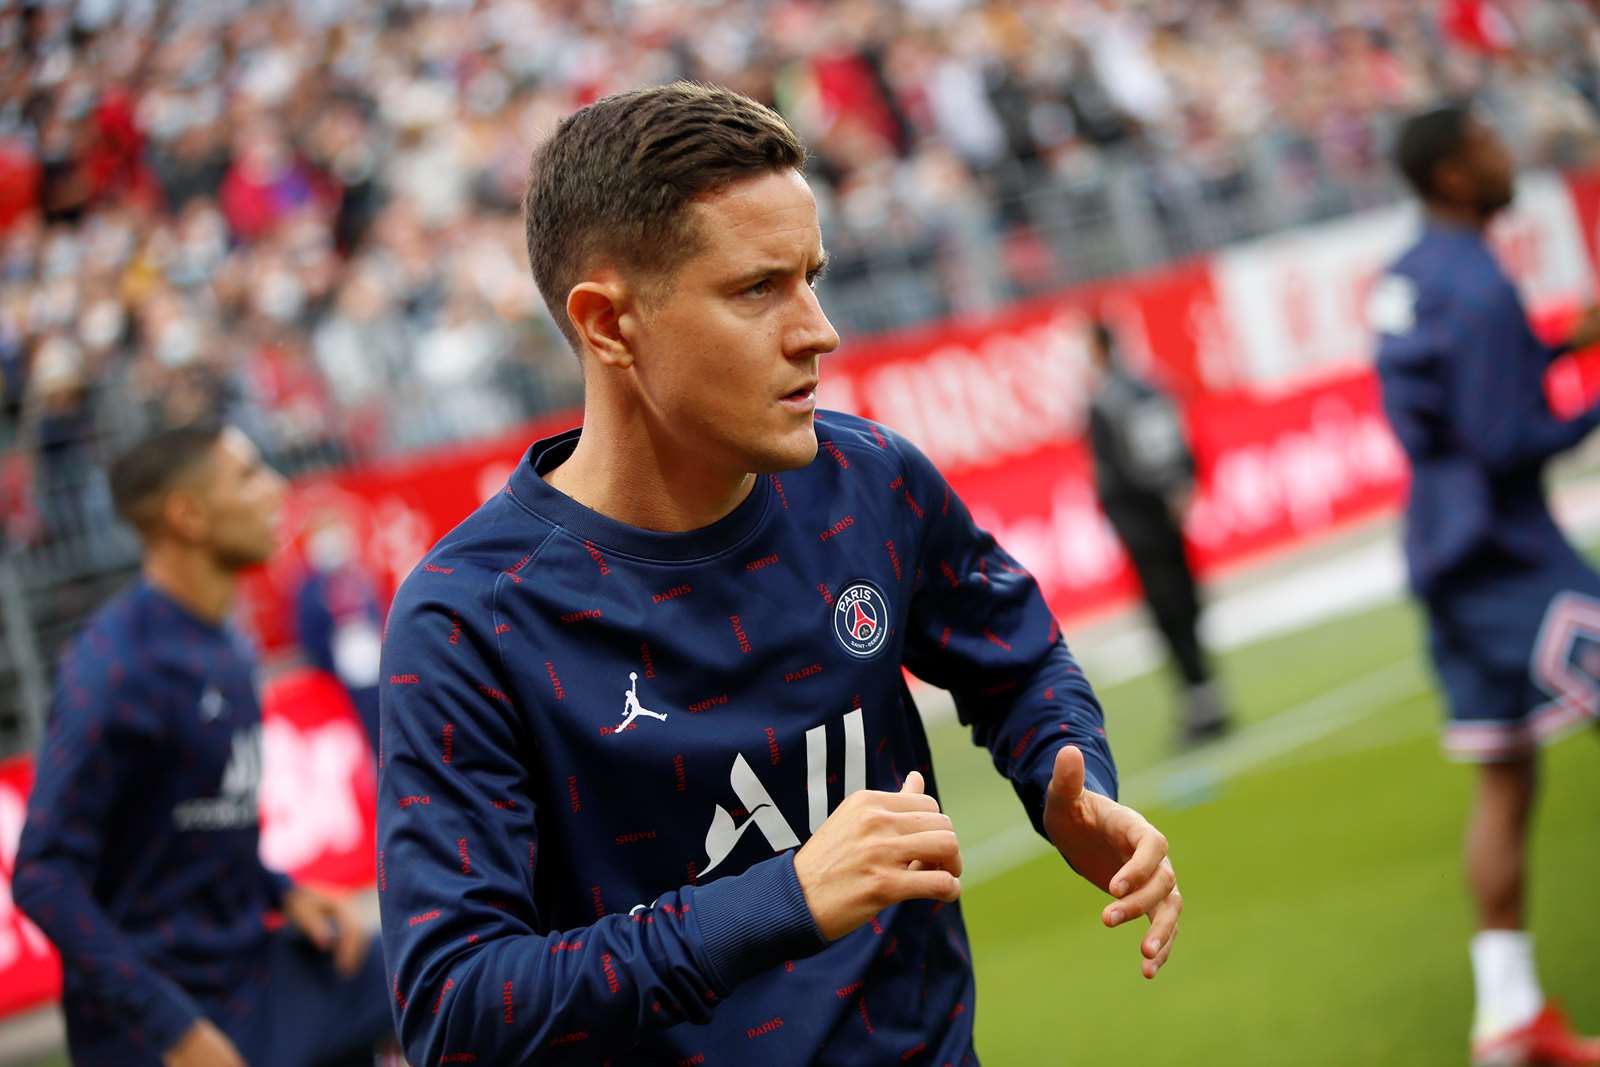 Ander Herrera sets exact date to sign for Real Zaragoza
